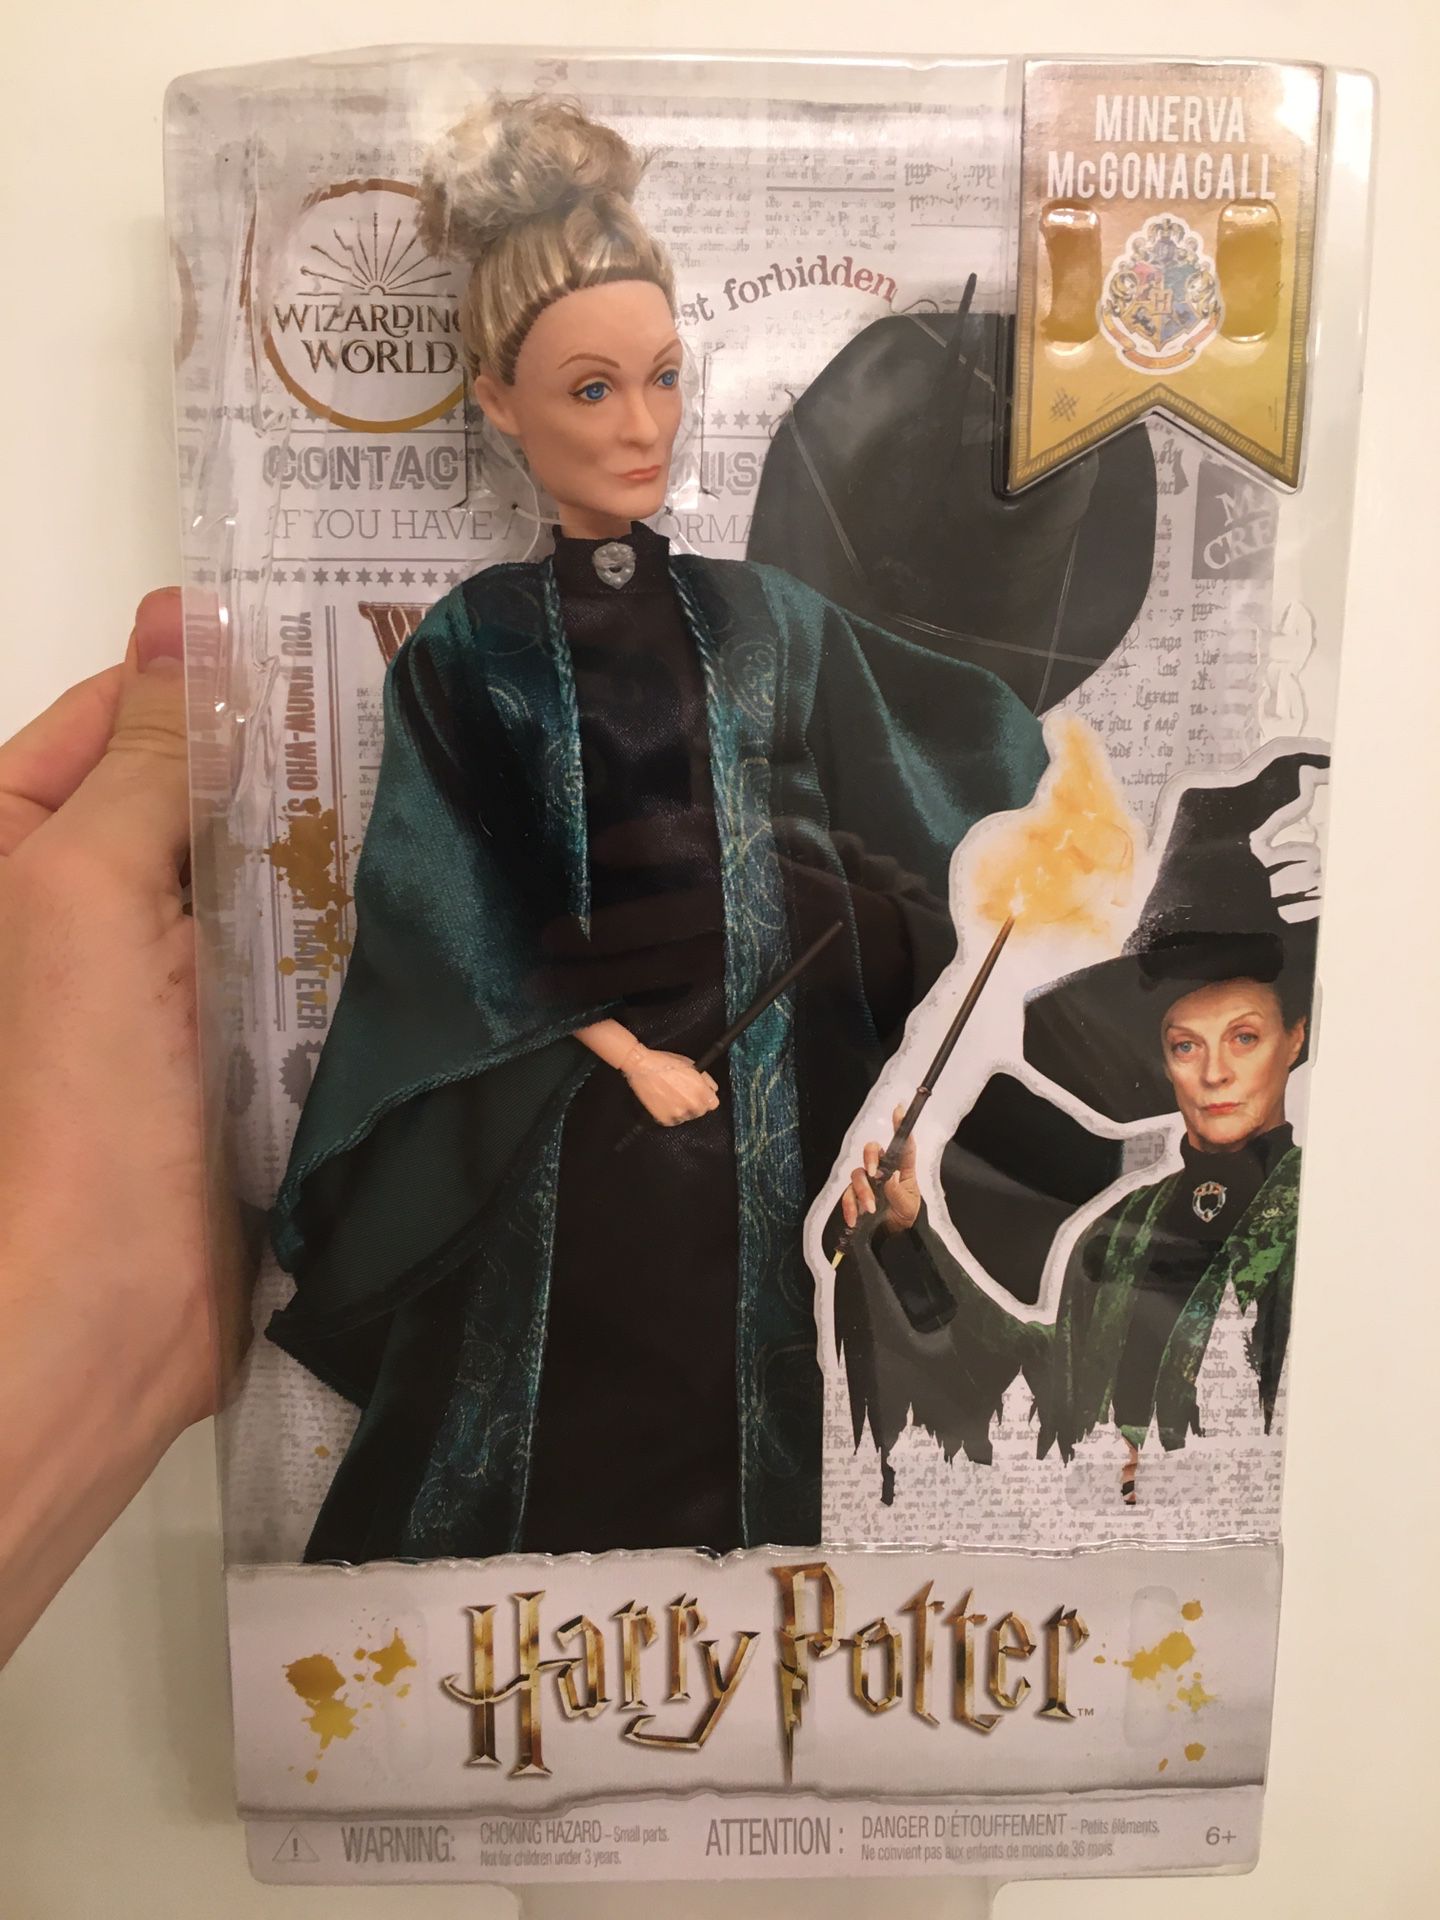 Harry Potter Minerva McGonagall Large Action Figure- Brand New Factory Sealed!!